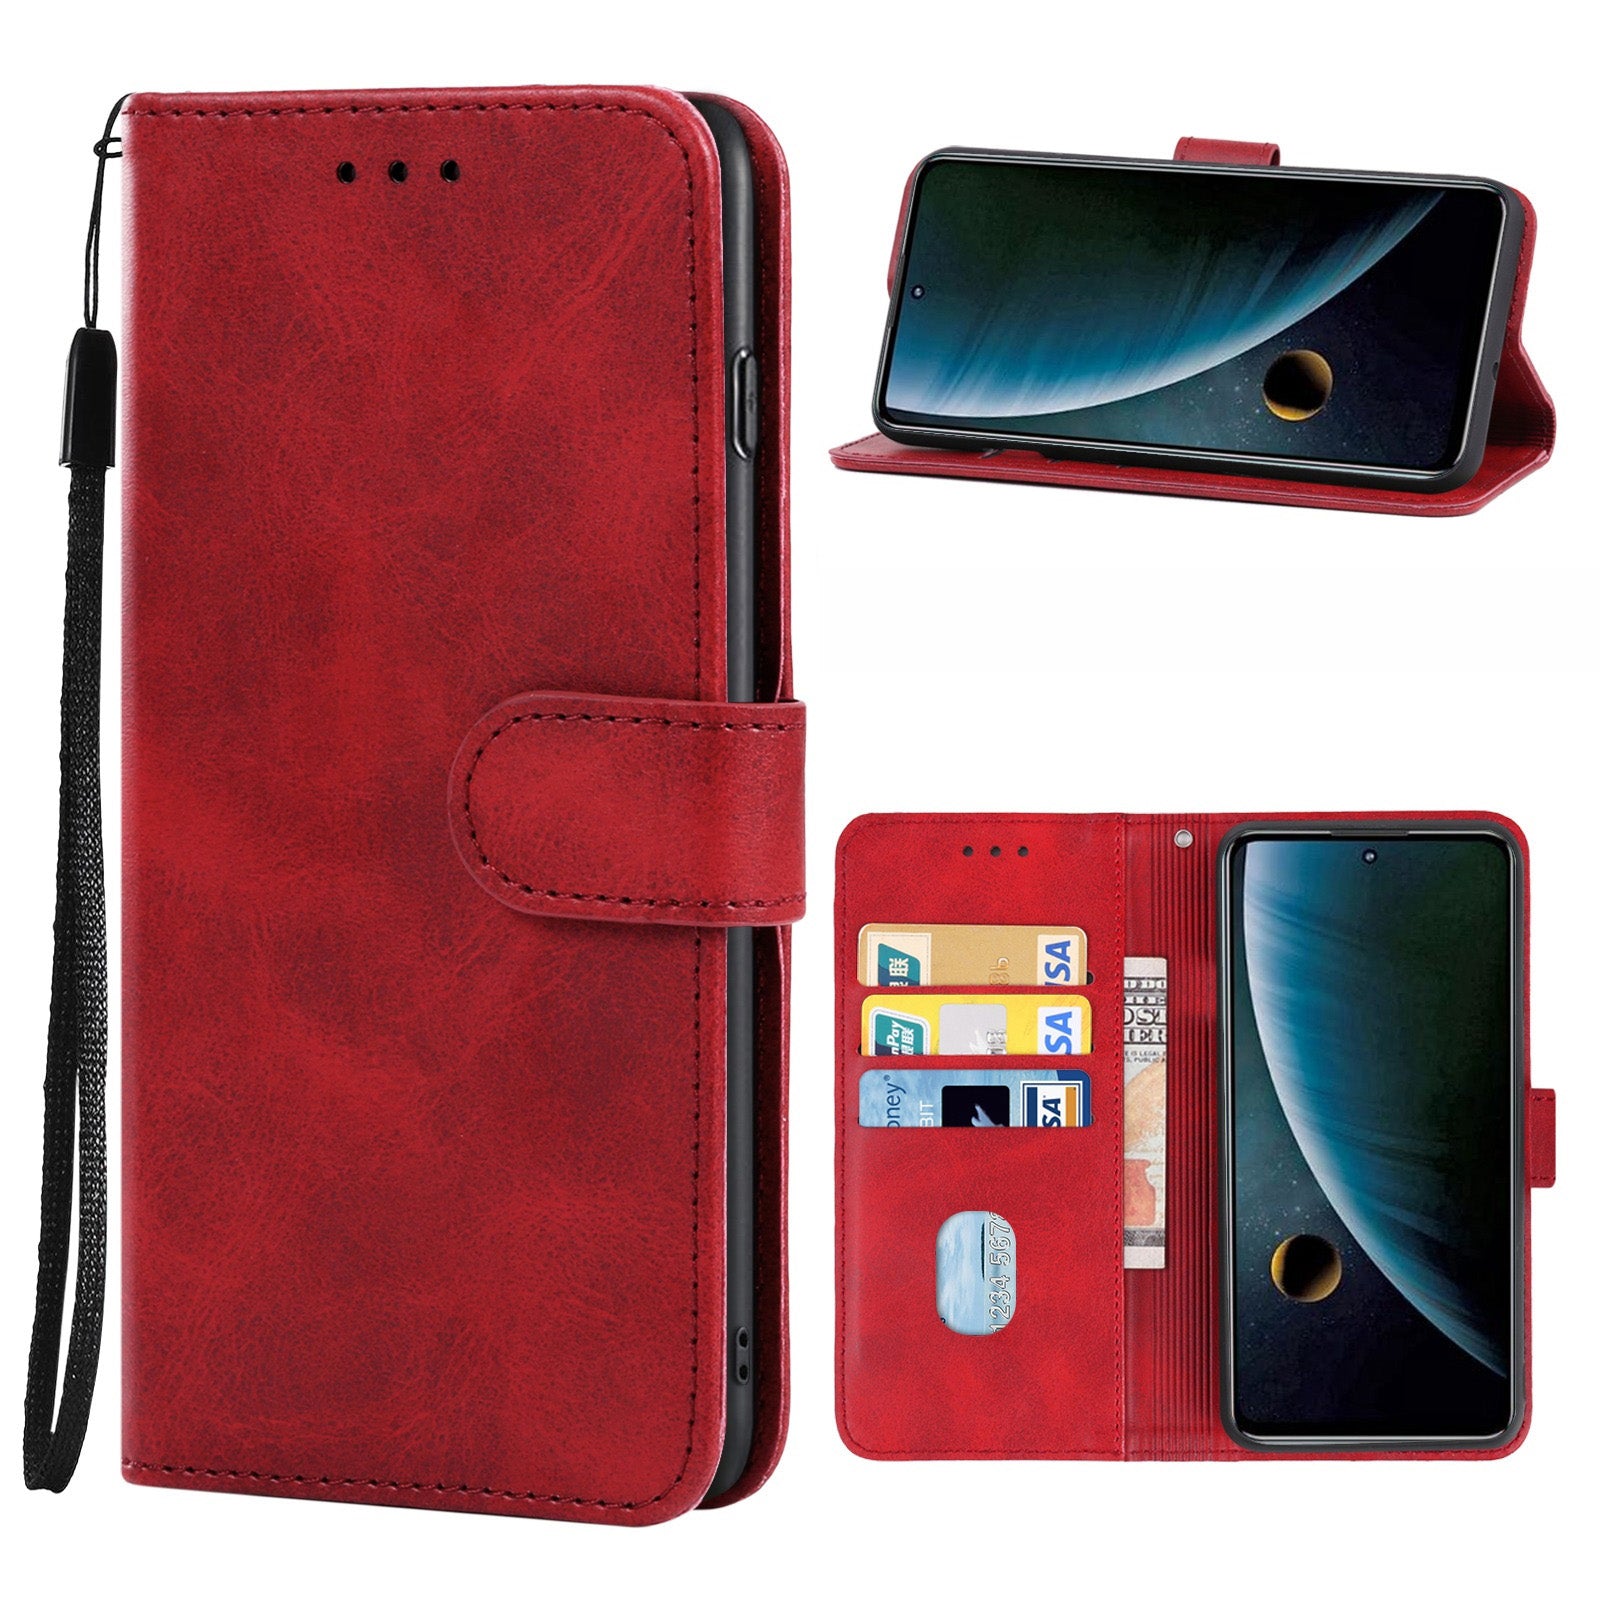 Uniqkart for ZTE Blade L220 Calf Texture Leather Case Wallet Stand Cell Phone Cover - Red